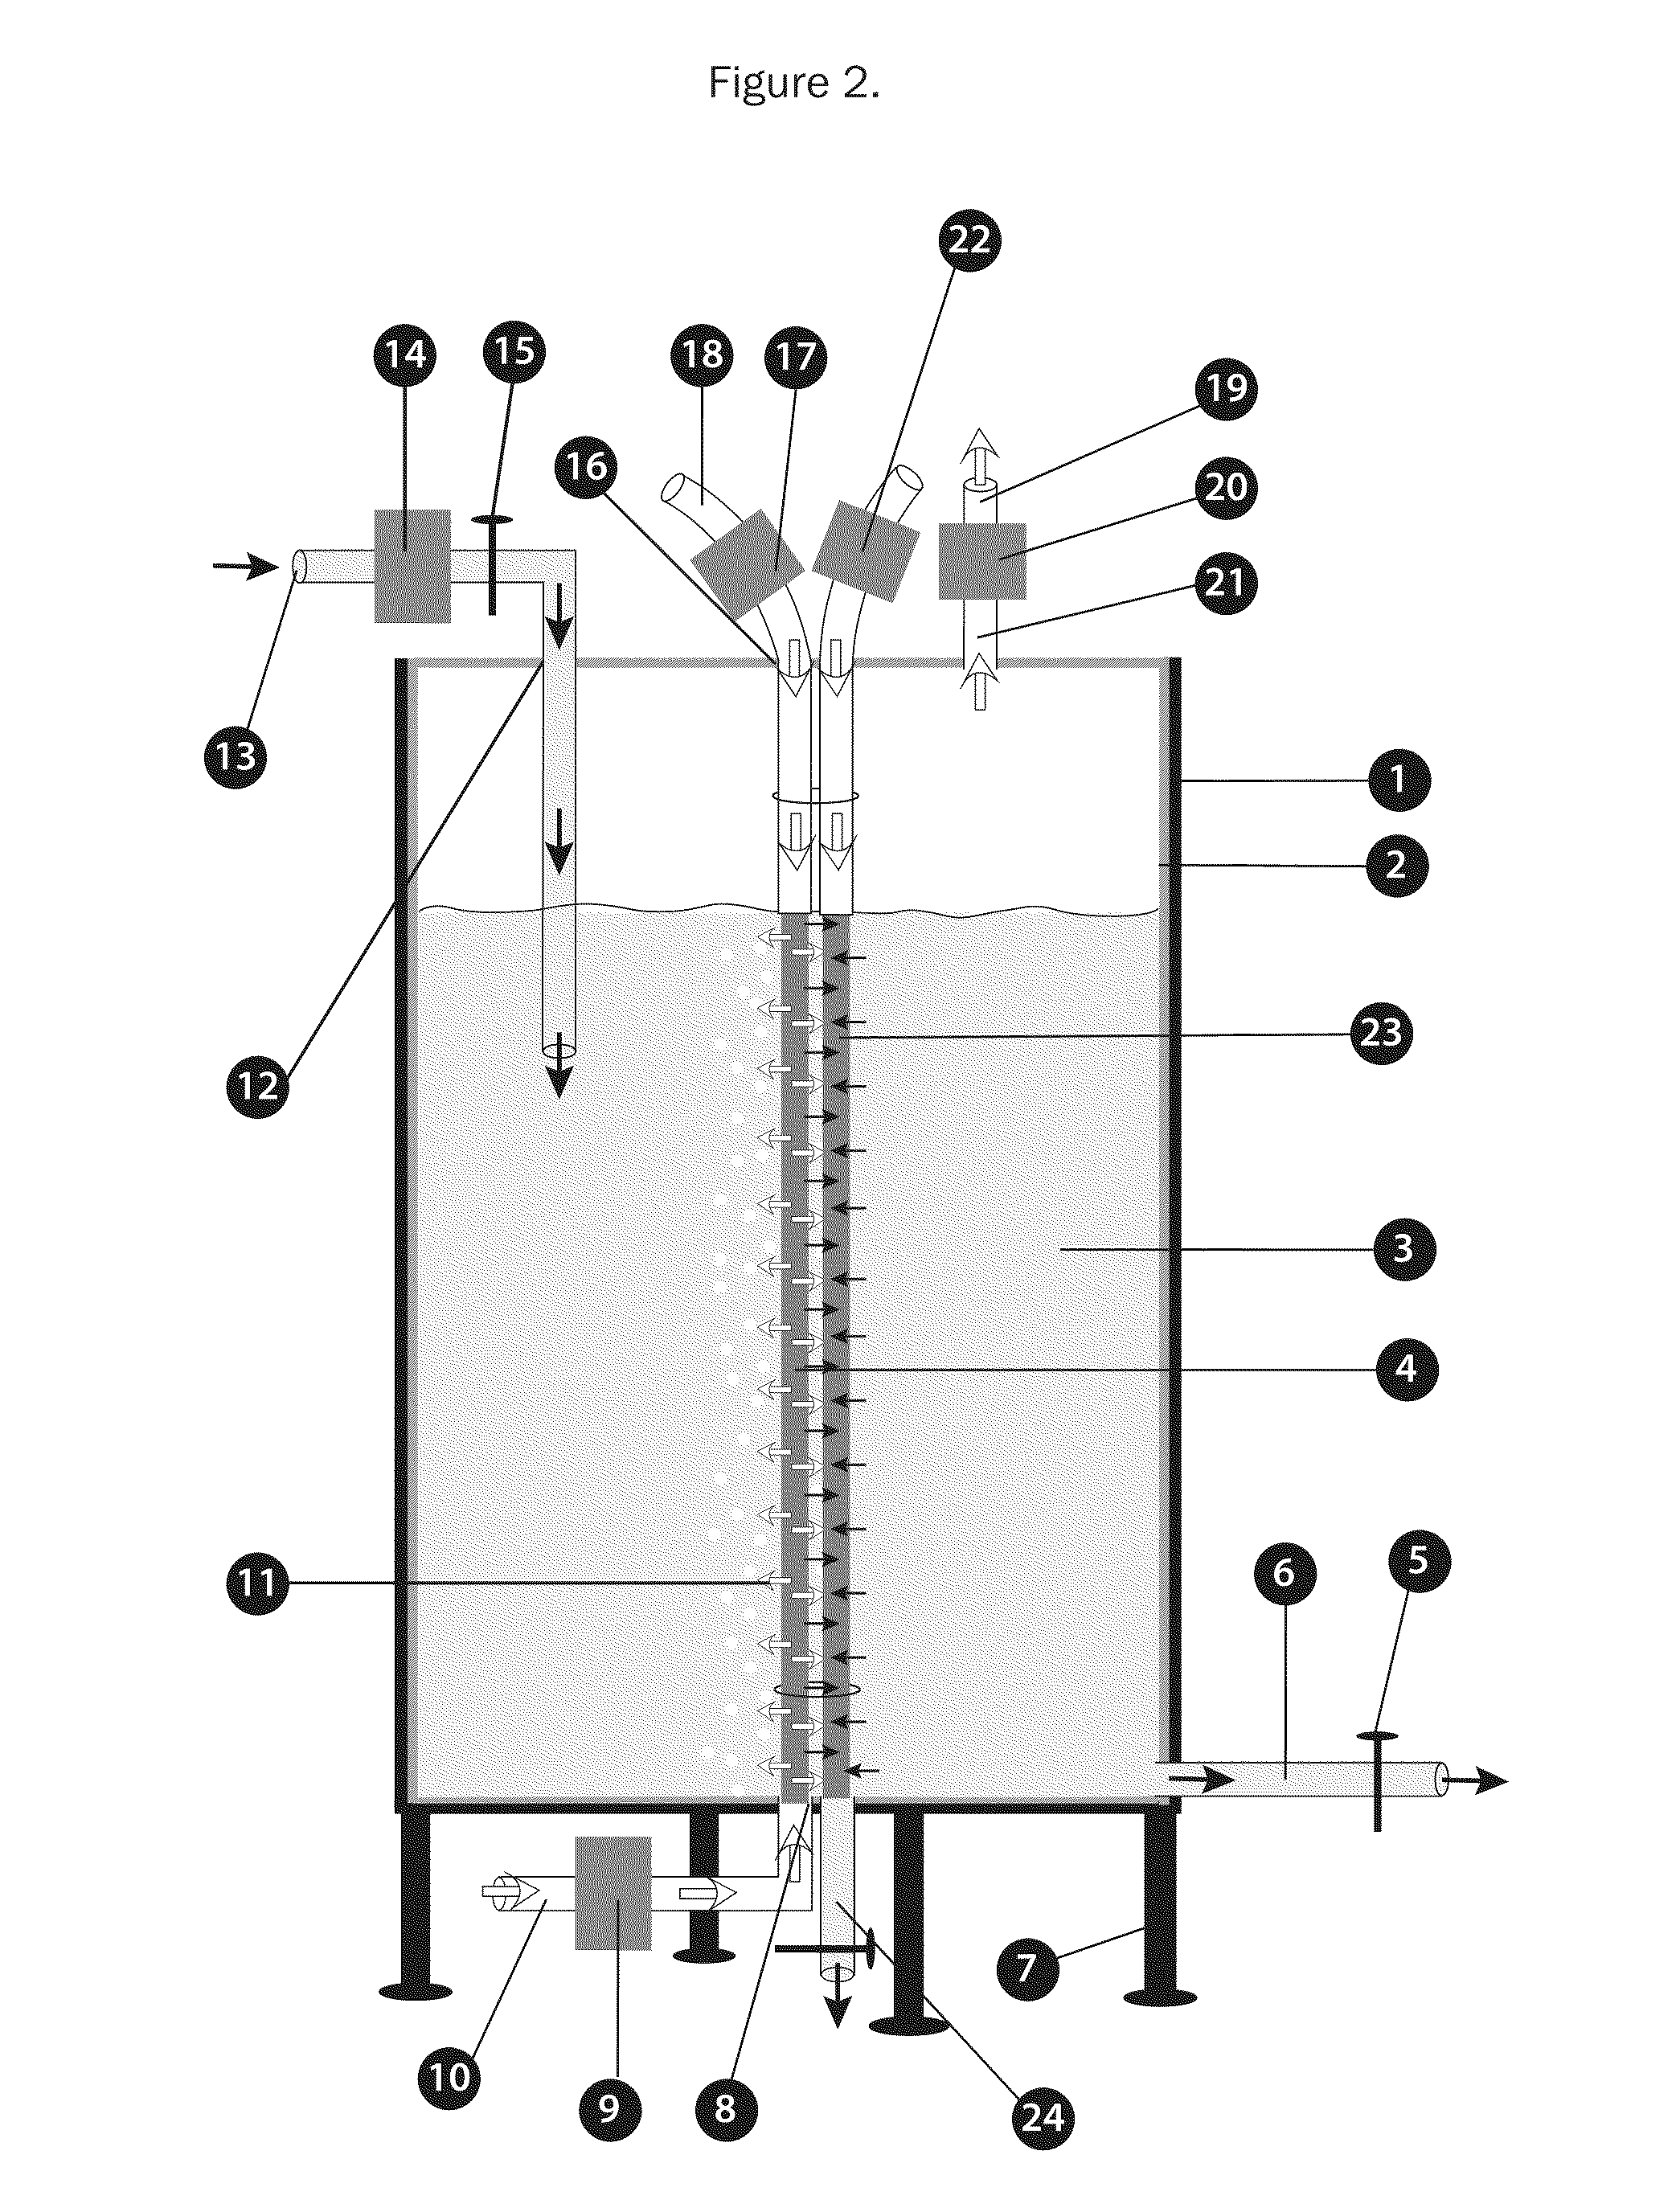 Bioreactors for fermentation and related methods